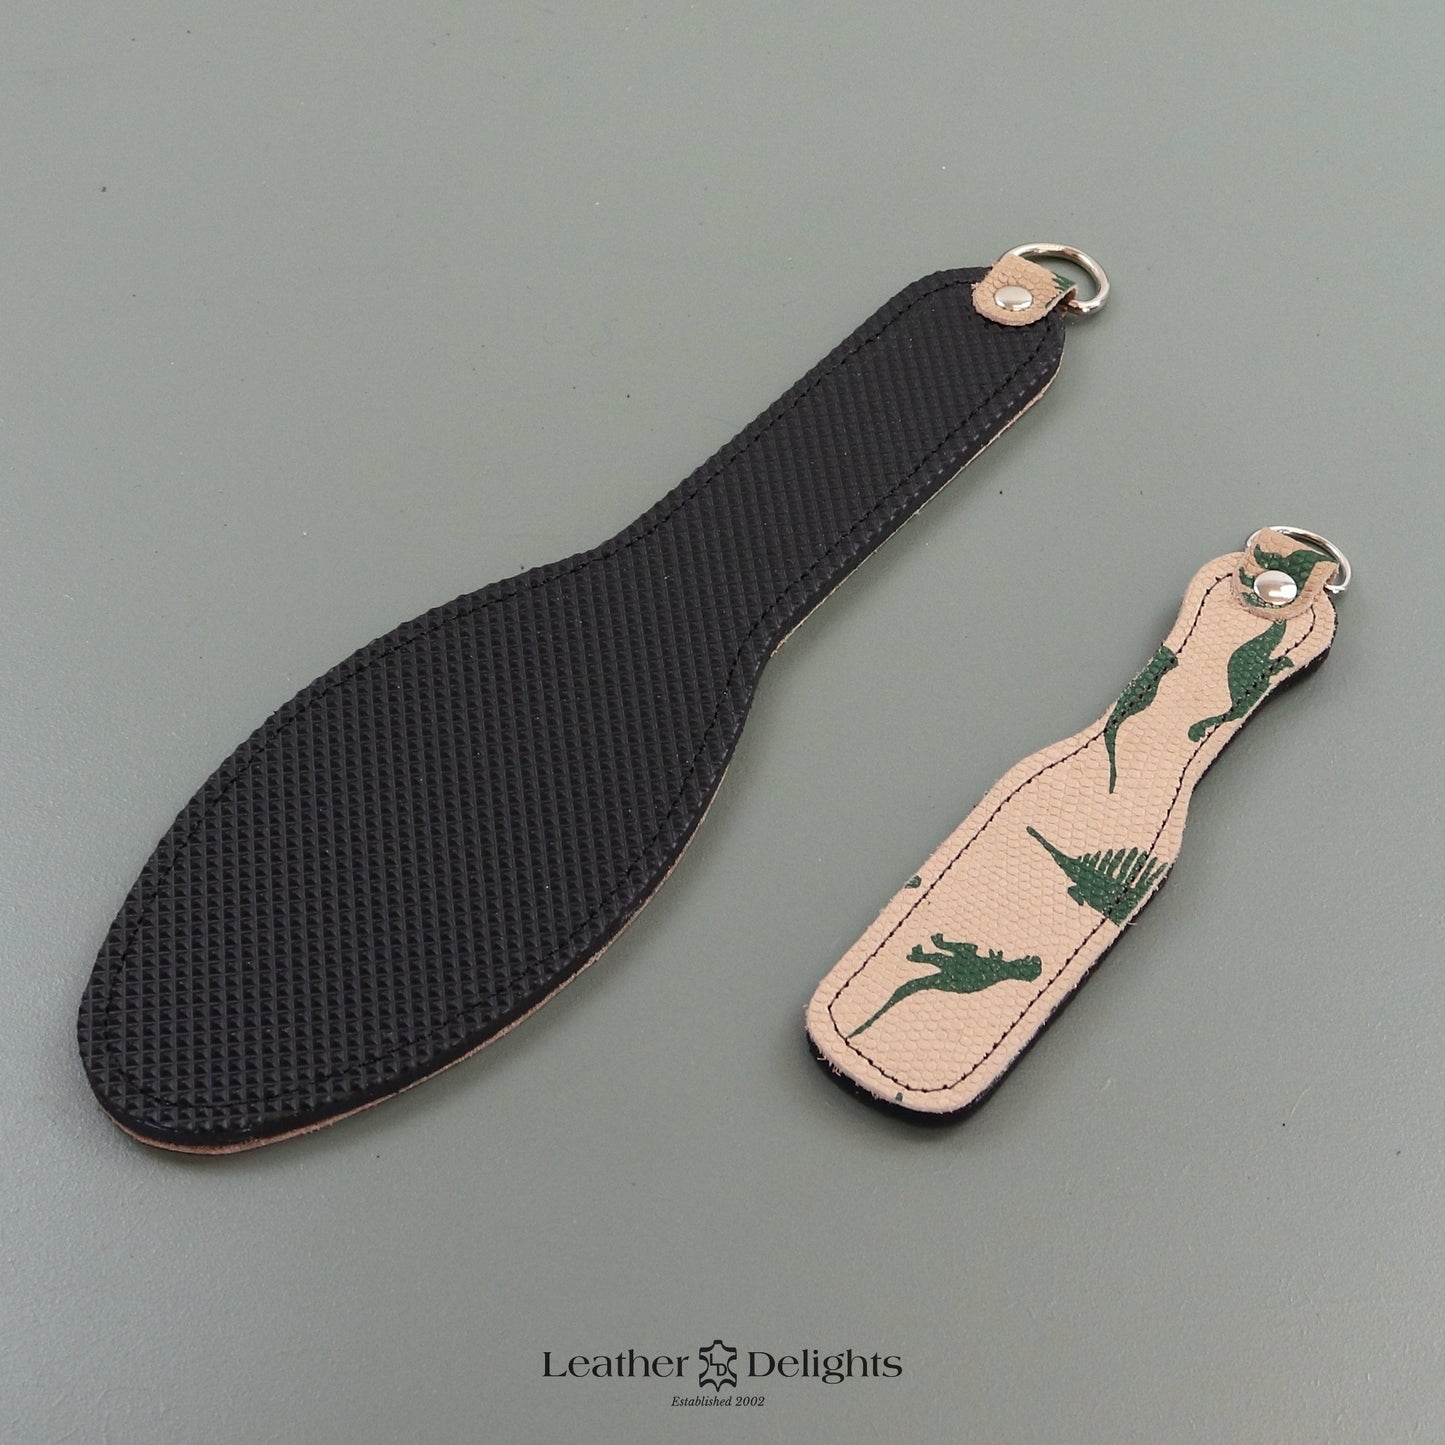 Shoe Sole - Dinosaur Print Leather & Dimpled Rubber